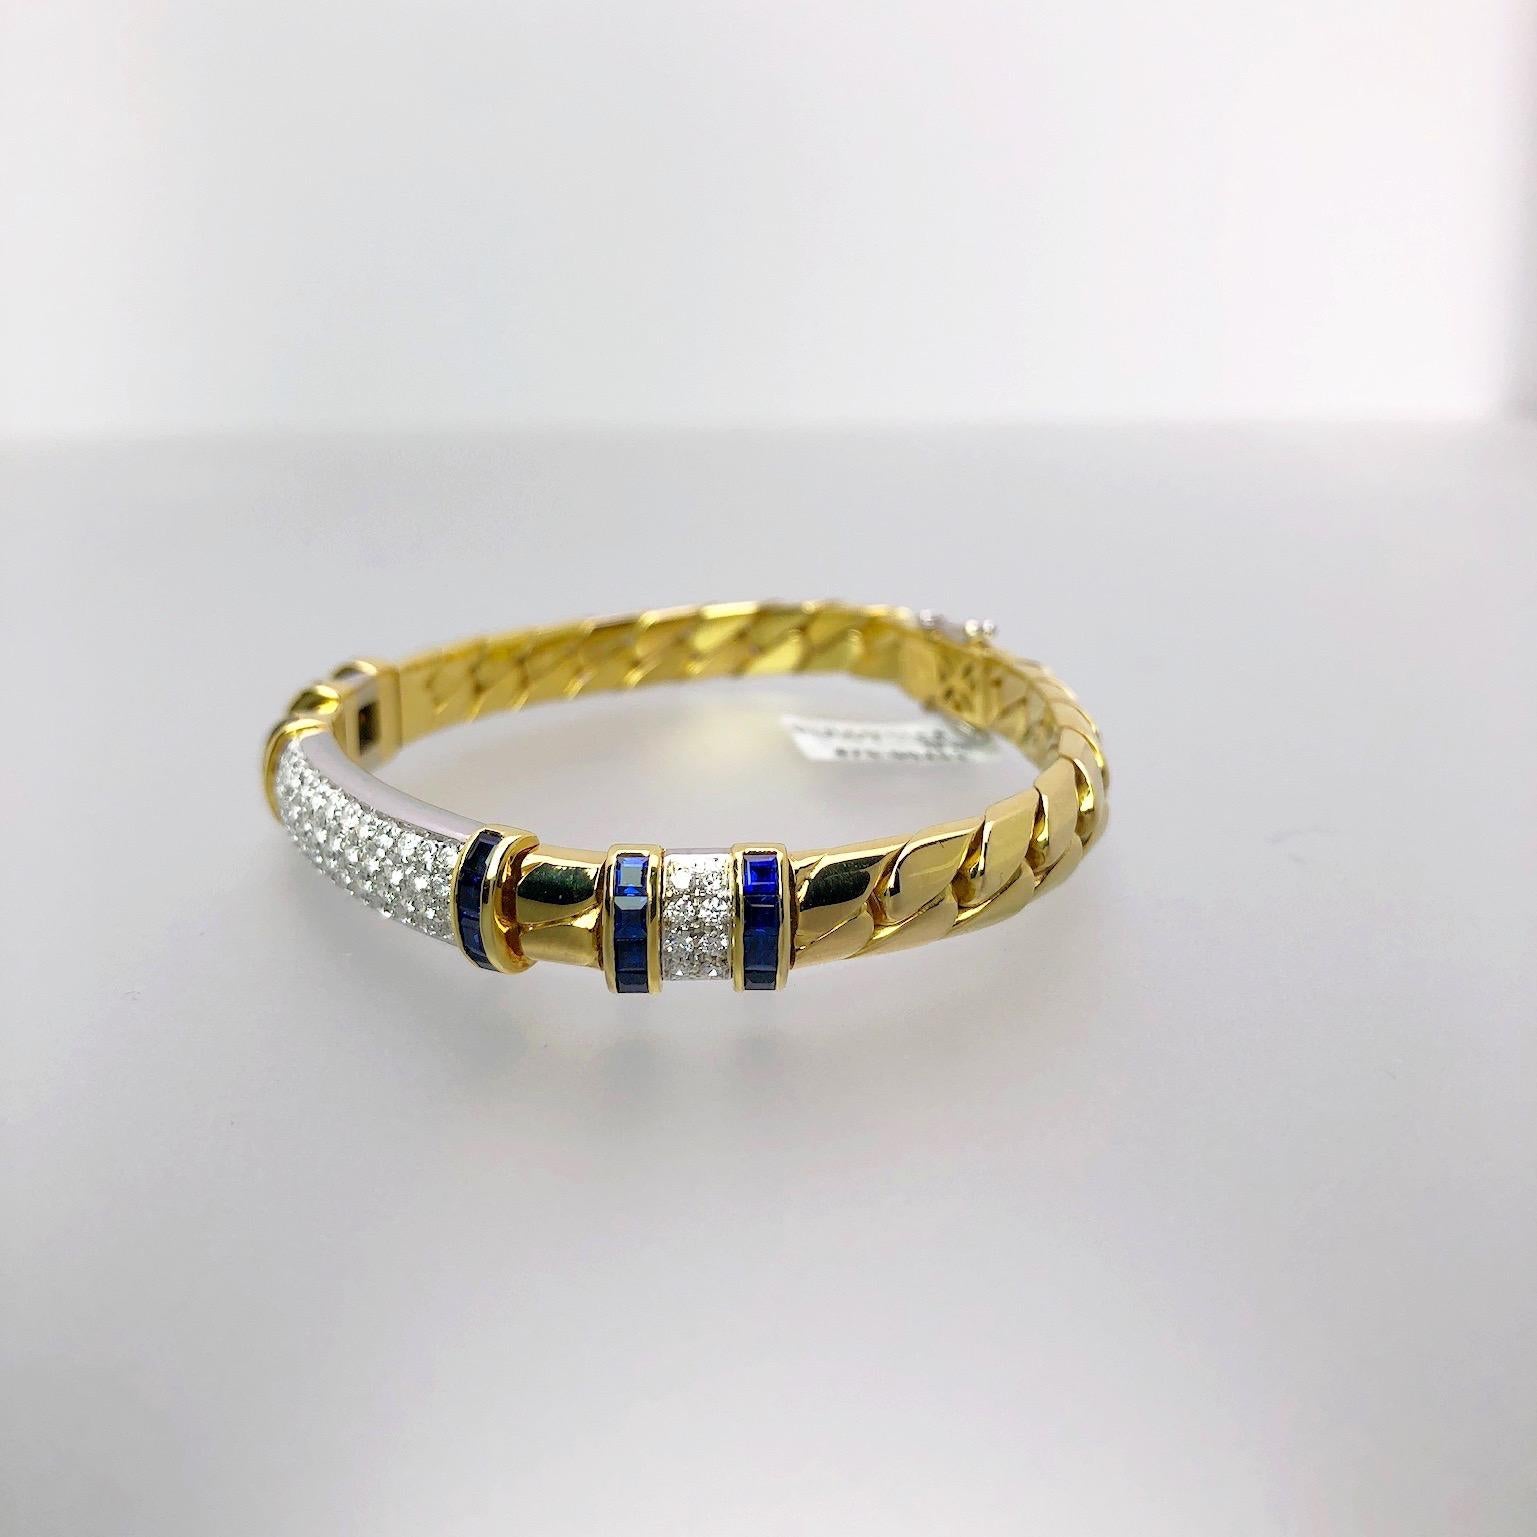 Picchiotti 18 Karat Gold, 2.42 Carat Diamond and Sapphire Gourmette Bracelet In New Condition For Sale In New York, NY